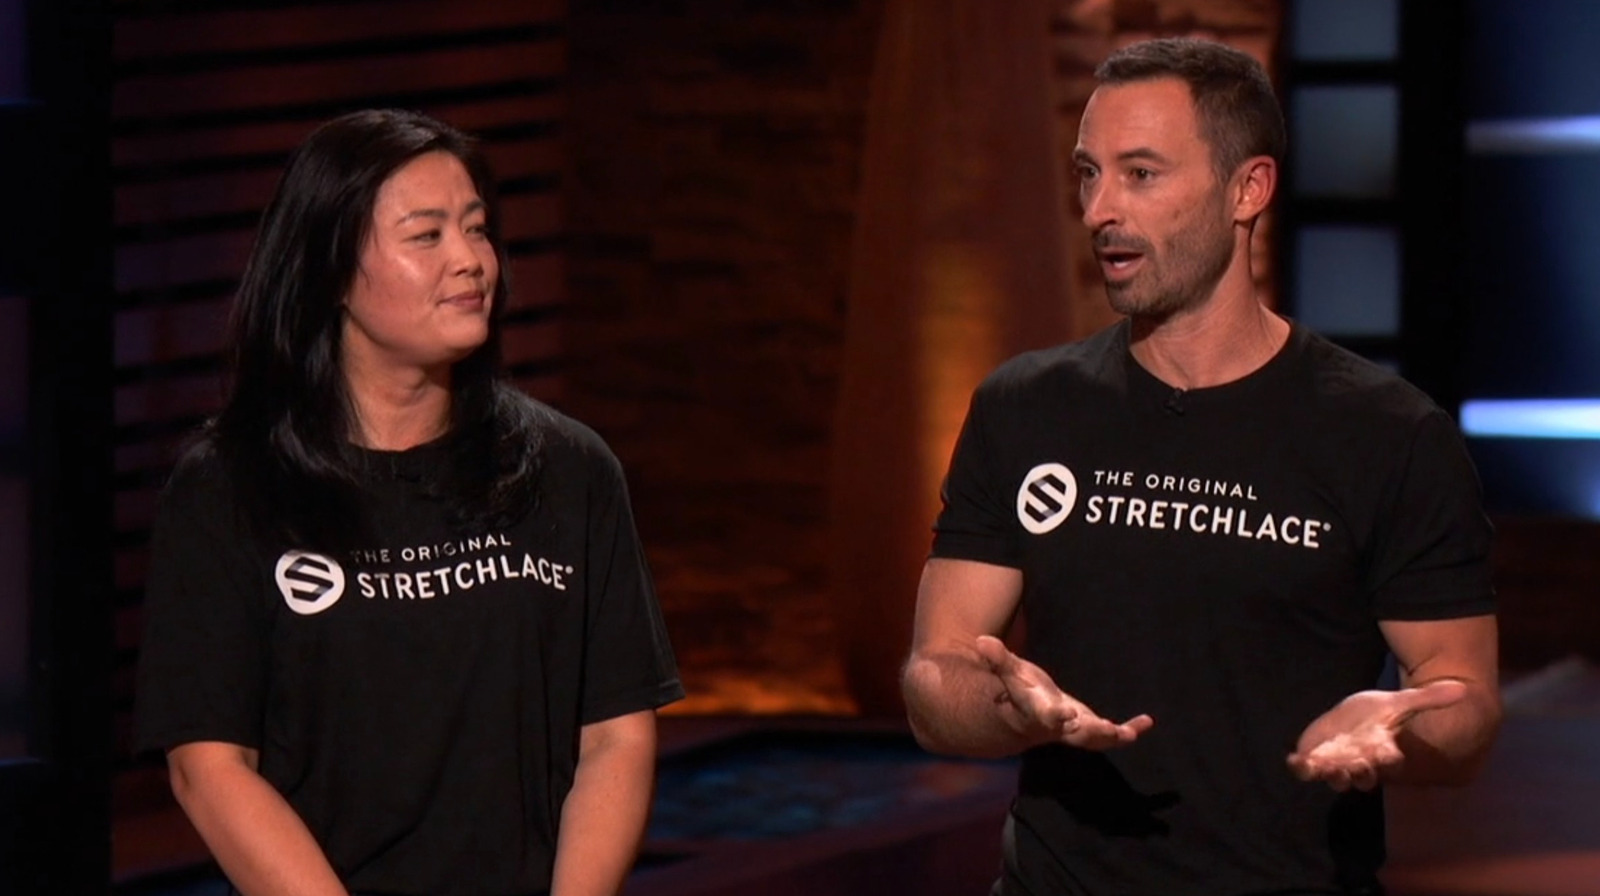 Whatever Happened To Stretchlace After Shark Tank?